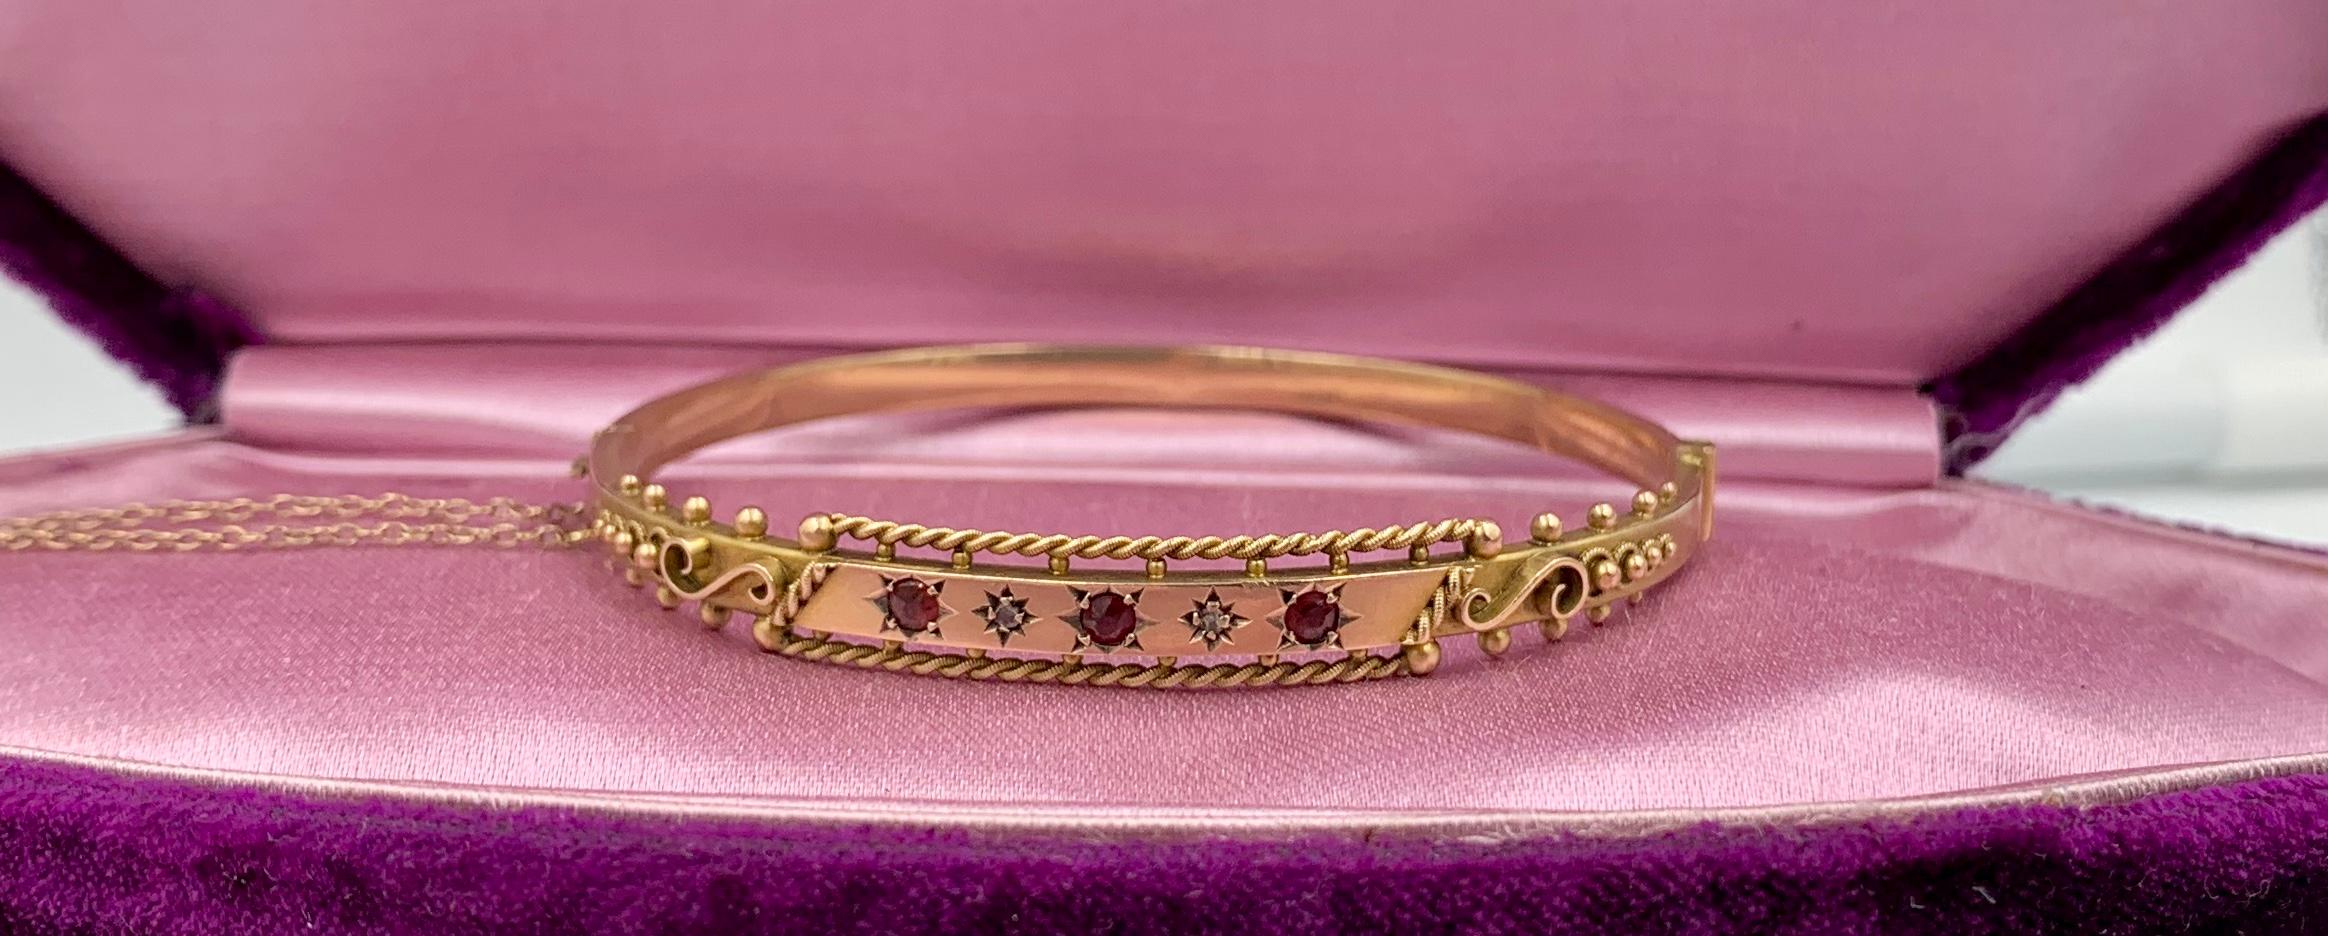 A delightful Victorian Bracelet set with round faceted Garnet and Diamond gems in an Etruscan Revival design in 9 Karat Rose Gold.  The wonderful red garnets alternate with the antique diamonds in star motif settings.  The beautiful Etruscan Revival